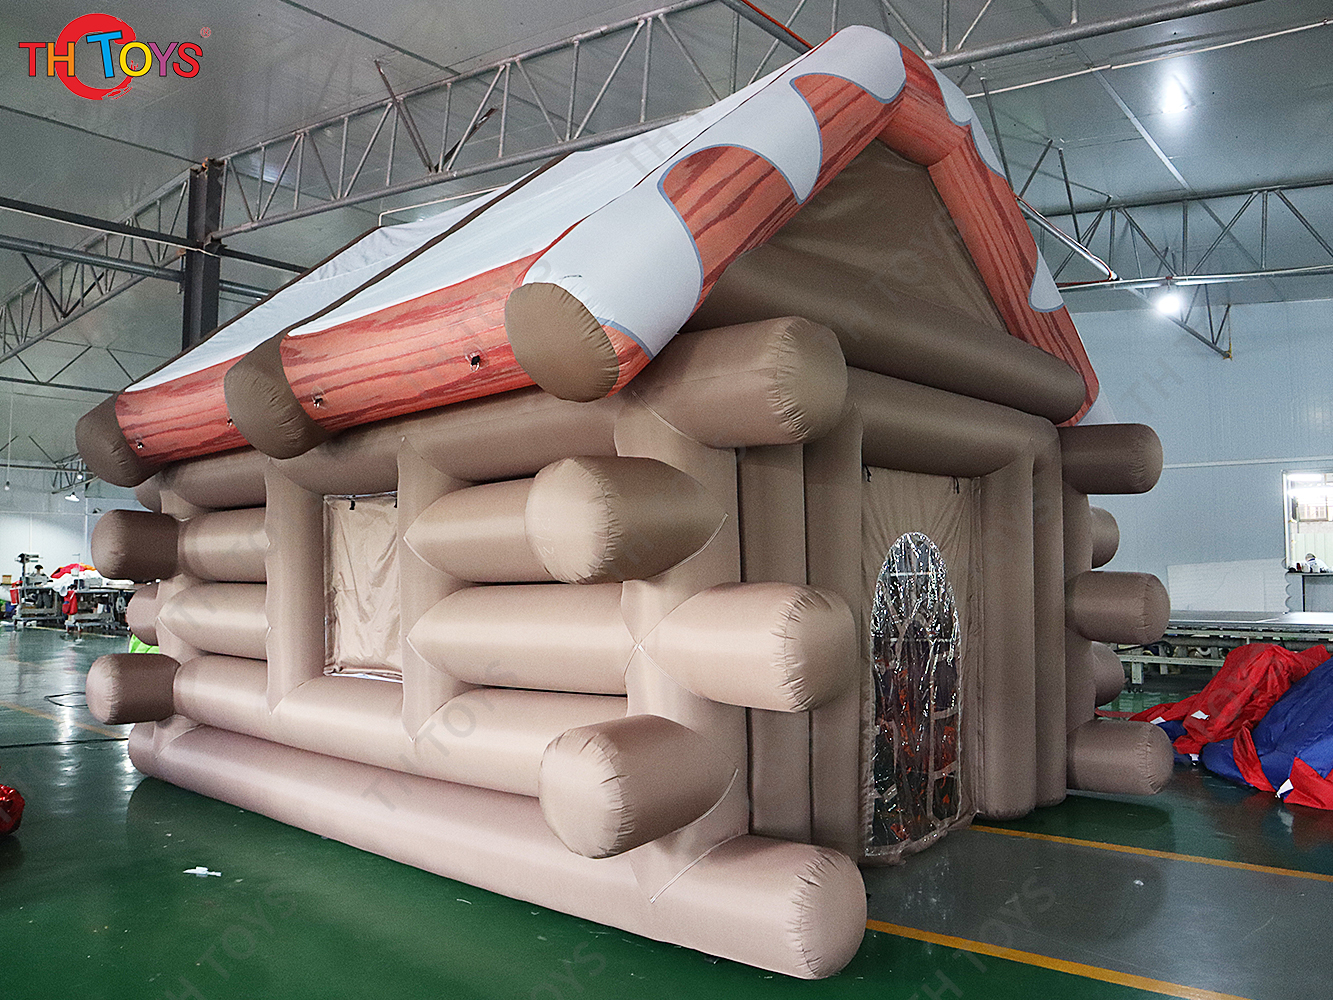 newest Inflatable Christmas House Santa Grotto Tent, 5x4m big Inflatable Wooden House For Festival Decoration